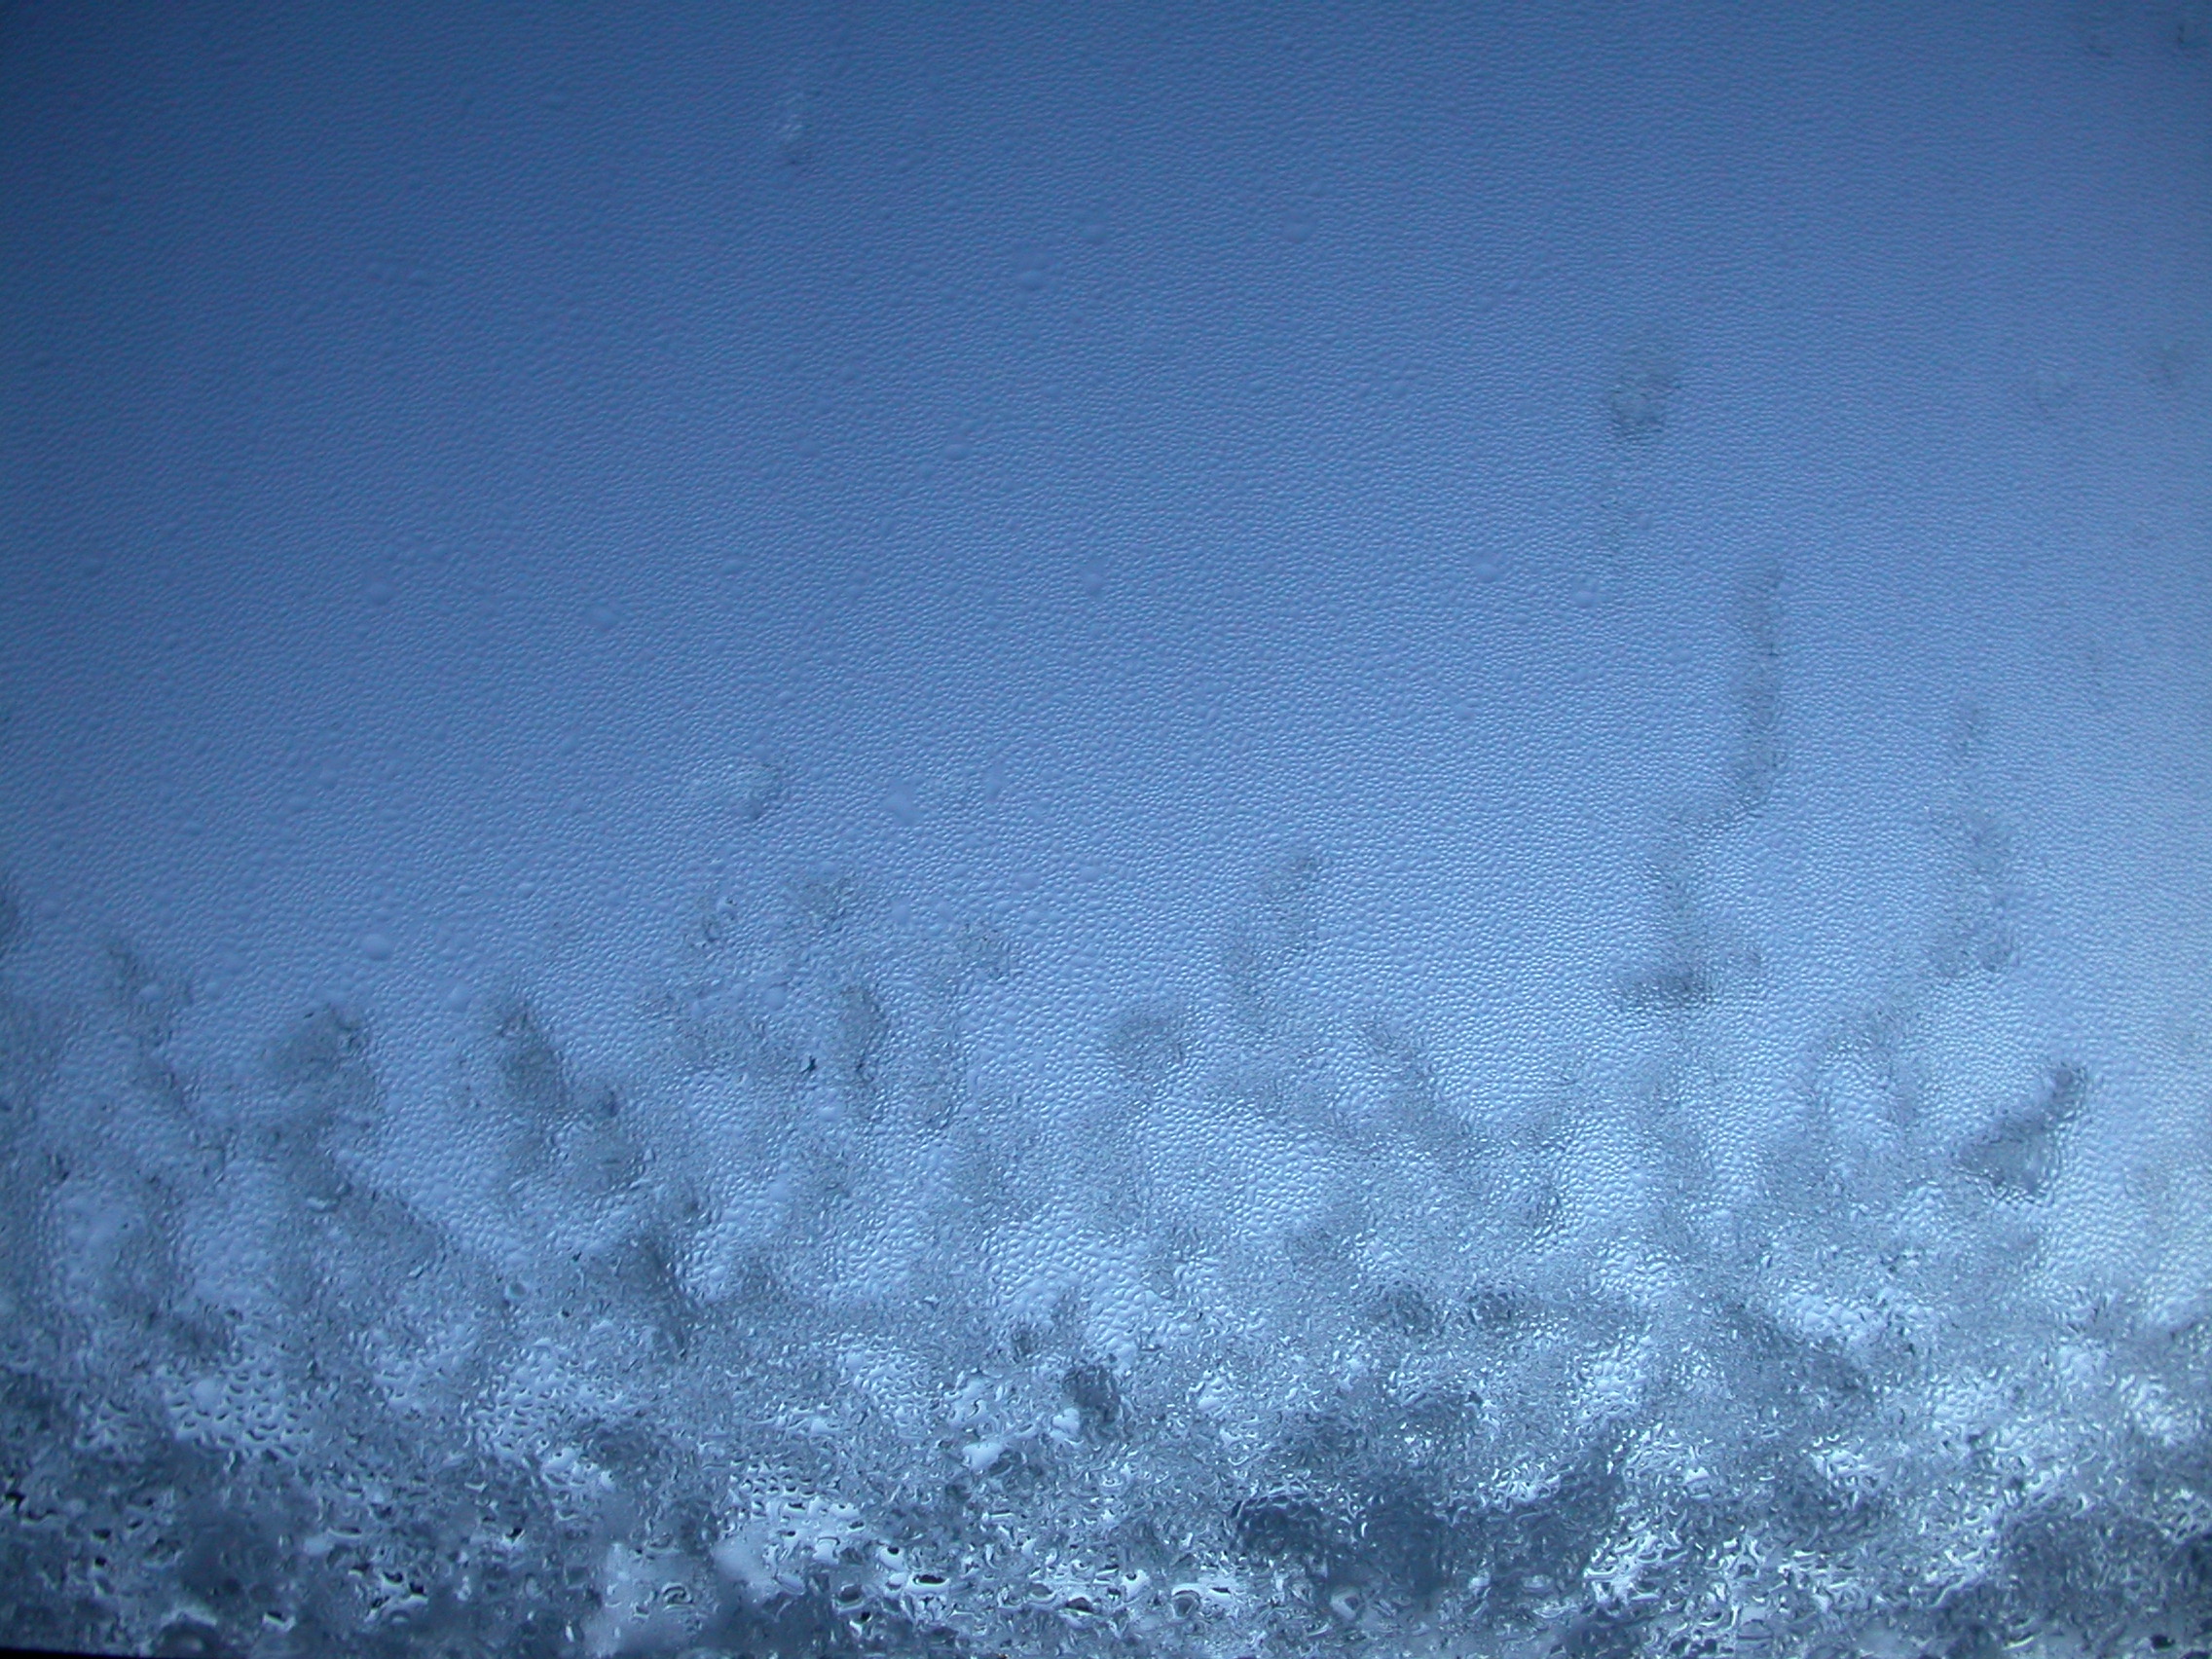 eva ice and condense on window glass blue frost winter